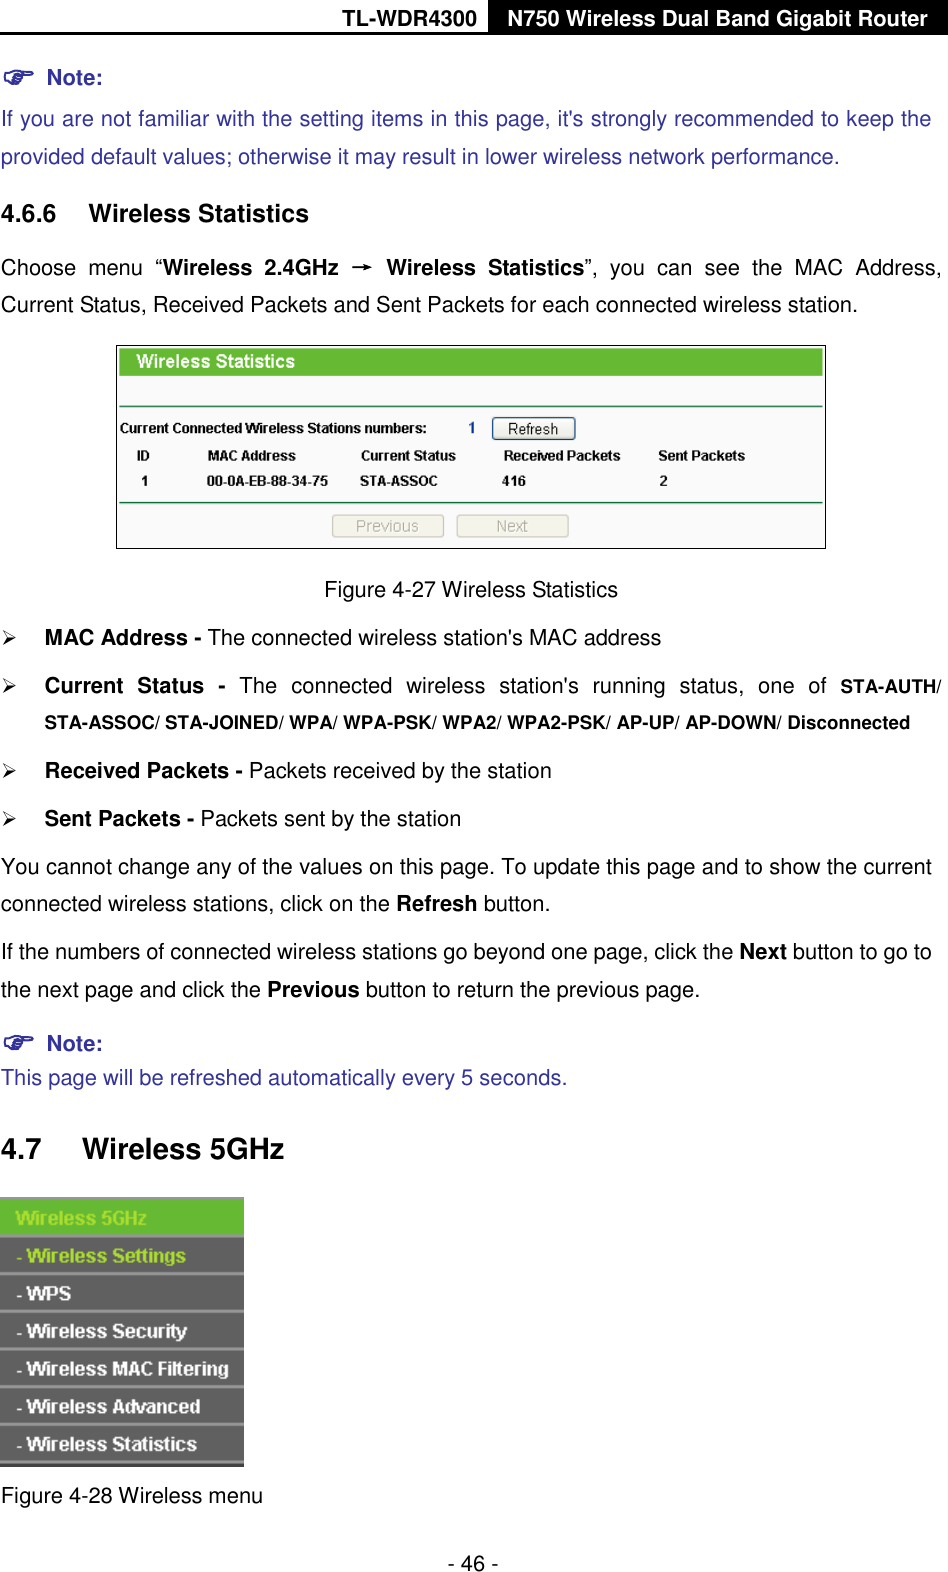 TL-WDR4300 N750 Wireless Dual Band Gigabit Router  - 46 -  Note:   If you are not familiar with the setting items in this page, it&apos;s strongly recommended to keep the provided default values; otherwise it may result in lower wireless network performance. 4.6.6  Wireless Statistics Choose  menu  “Wireless  2.4GHz →  Wireless  Statistics”,  you  can  see  the  MAC  Address, Current Status, Received Packets and Sent Packets for each connected wireless station.  Figure 4-27 Wireless Statistics  MAC Address - The connected wireless station&apos;s MAC address  Current  Status -  The  connected  wireless  station&apos;s  running  status,  one  of  STA-AUTH/ STA-ASSOC/ STA-JOINED/ WPA/ WPA-PSK/ WPA2/ WPA2-PSK/ AP-UP/ AP-DOWN/ Disconnected  Received Packets - Packets received by the station  Sent Packets - Packets sent by the station You cannot change any of the values on this page. To update this page and to show the current connected wireless stations, click on the Refresh button.   If the numbers of connected wireless stations go beyond one page, click the Next button to go to the next page and click the Previous button to return the previous page.  Note:   This page will be refreshed automatically every 5 seconds. 4.7  Wireless 5GHz  Figure 4-28 Wireless menu 